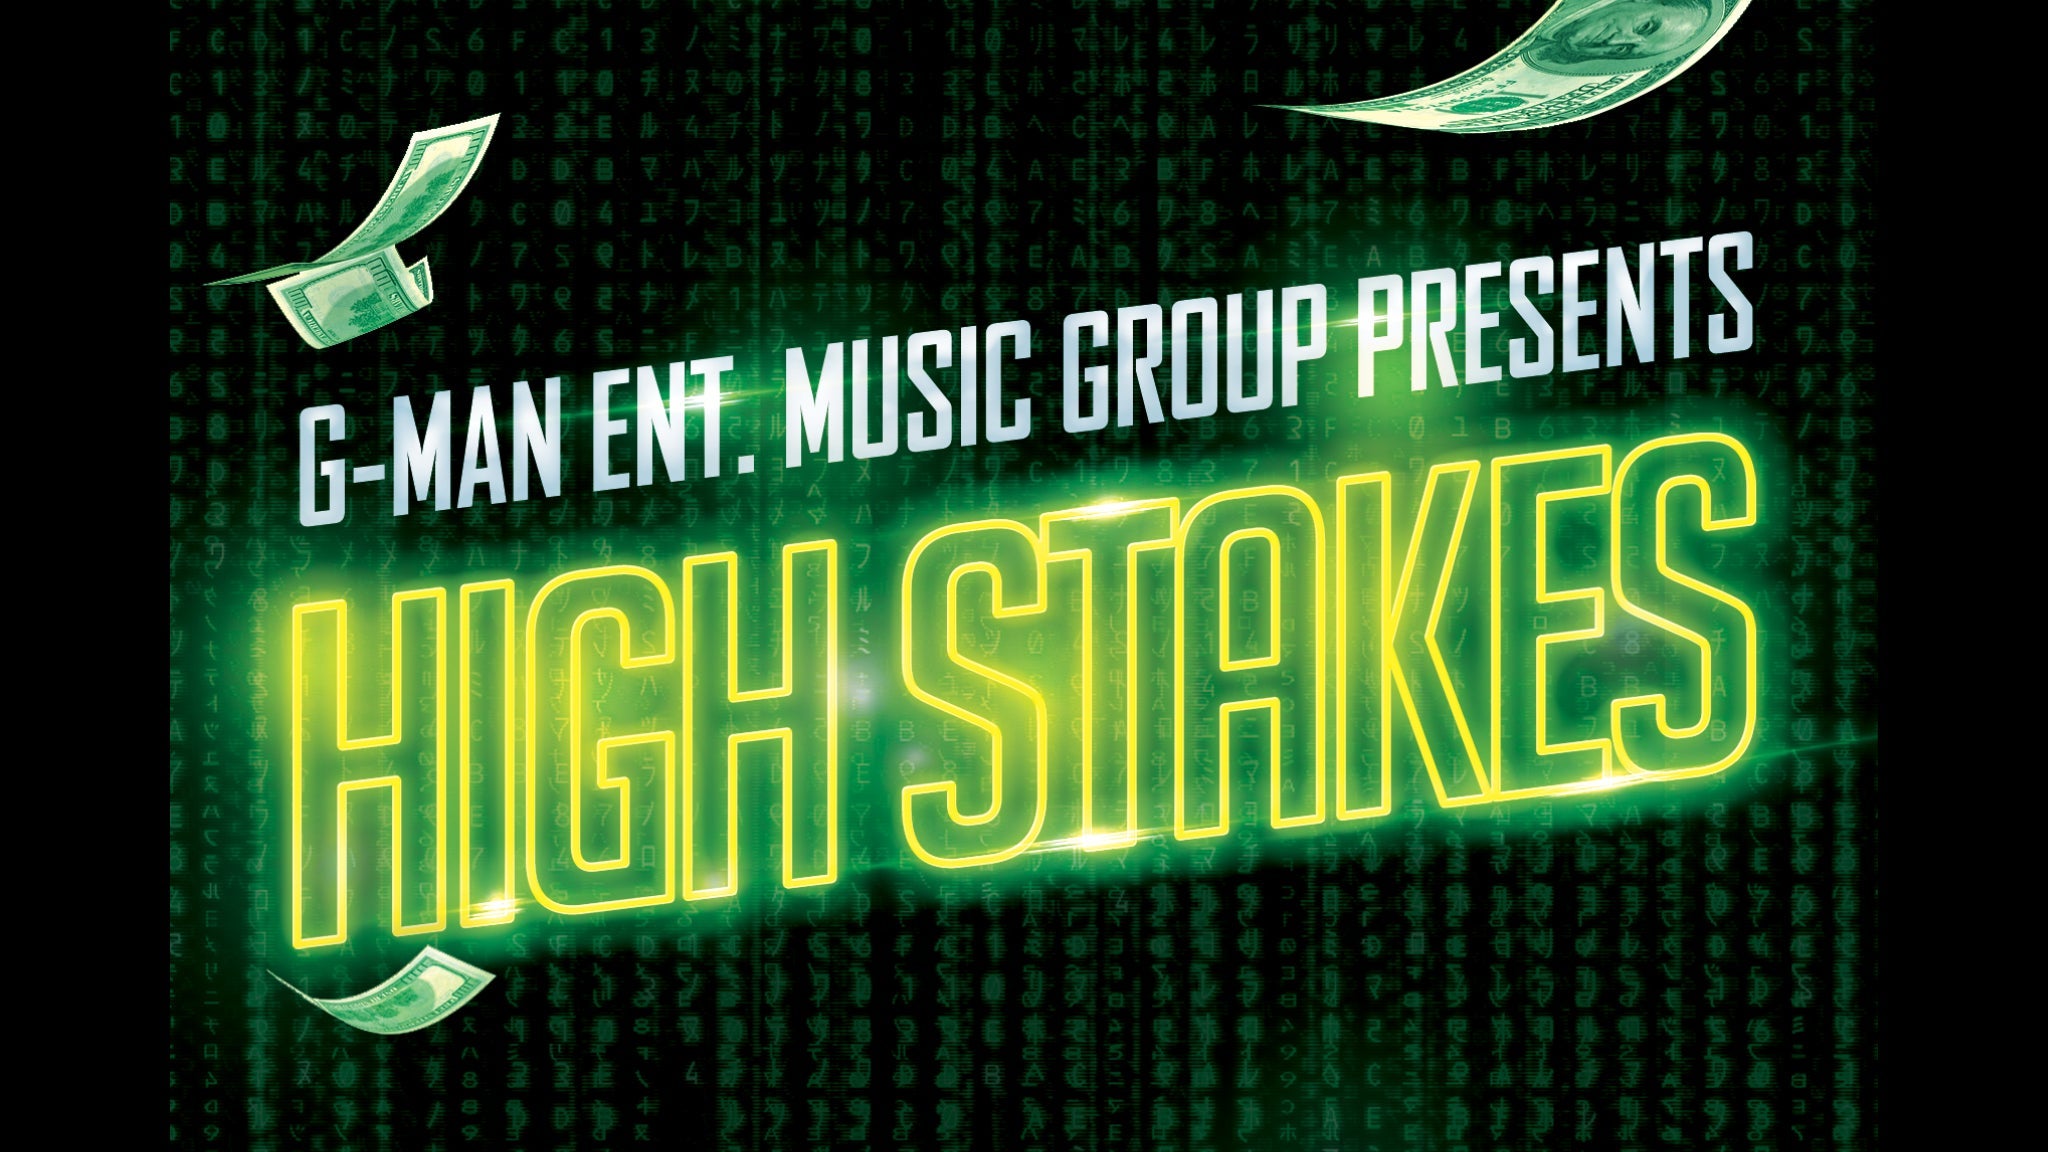 G-Man Ent Music Group Presents High Stakes at Elevation 27